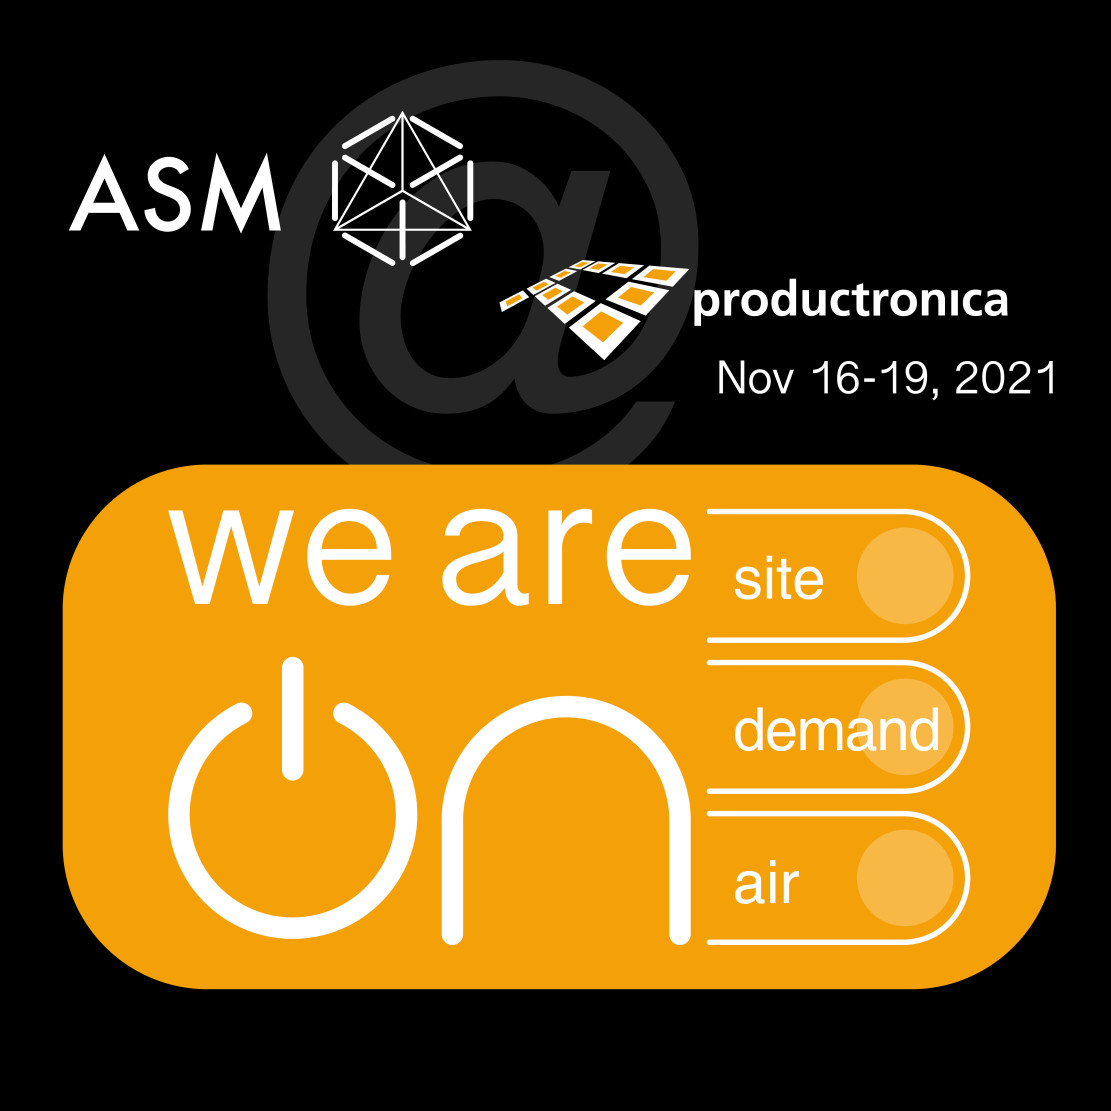 asm_to_feature_open_automation_concepts_at_productronica_2021_-_productronica_visual